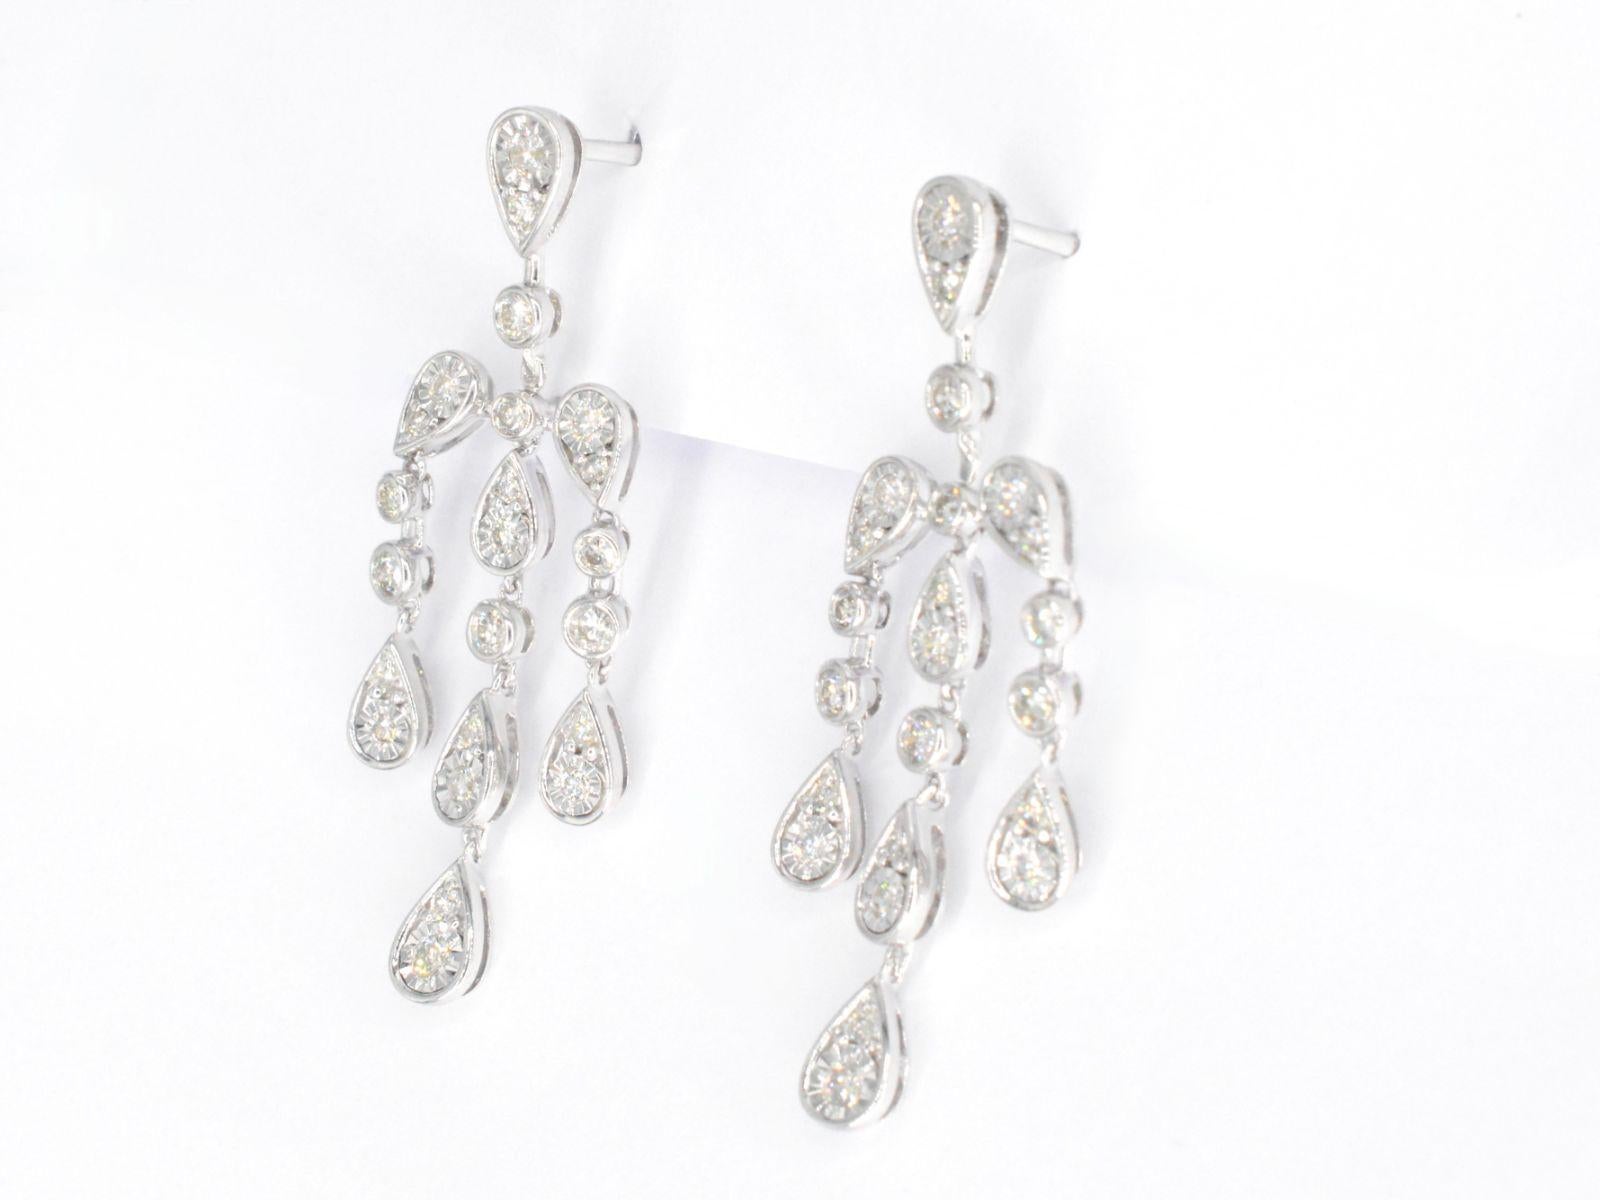 Brilliant Cut AIG Certified, White Golden Earrings in Special Design with Diamonds For Sale